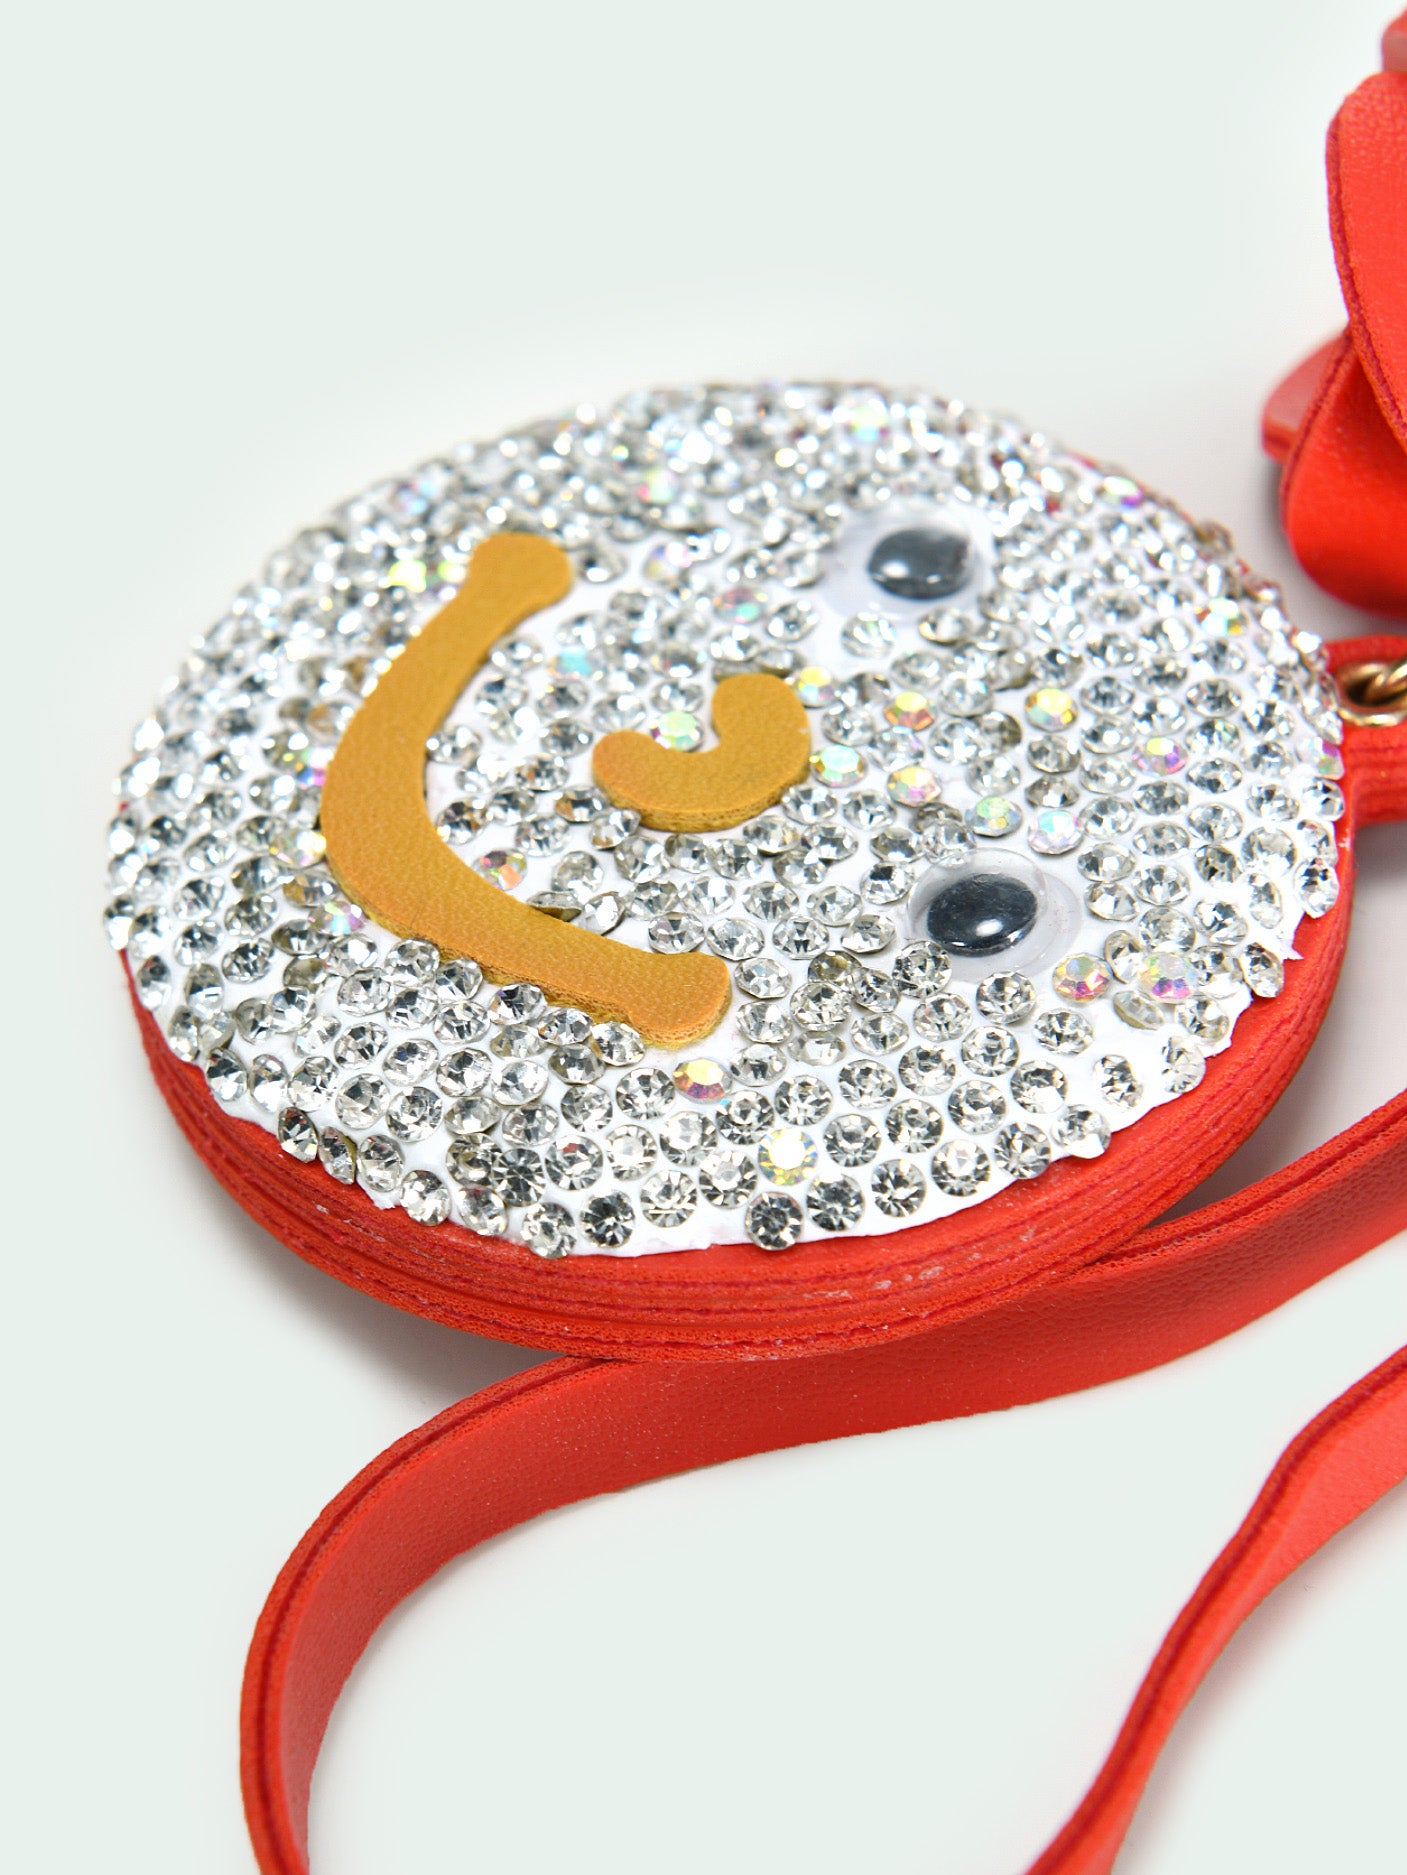 Smiley Face Key Chain